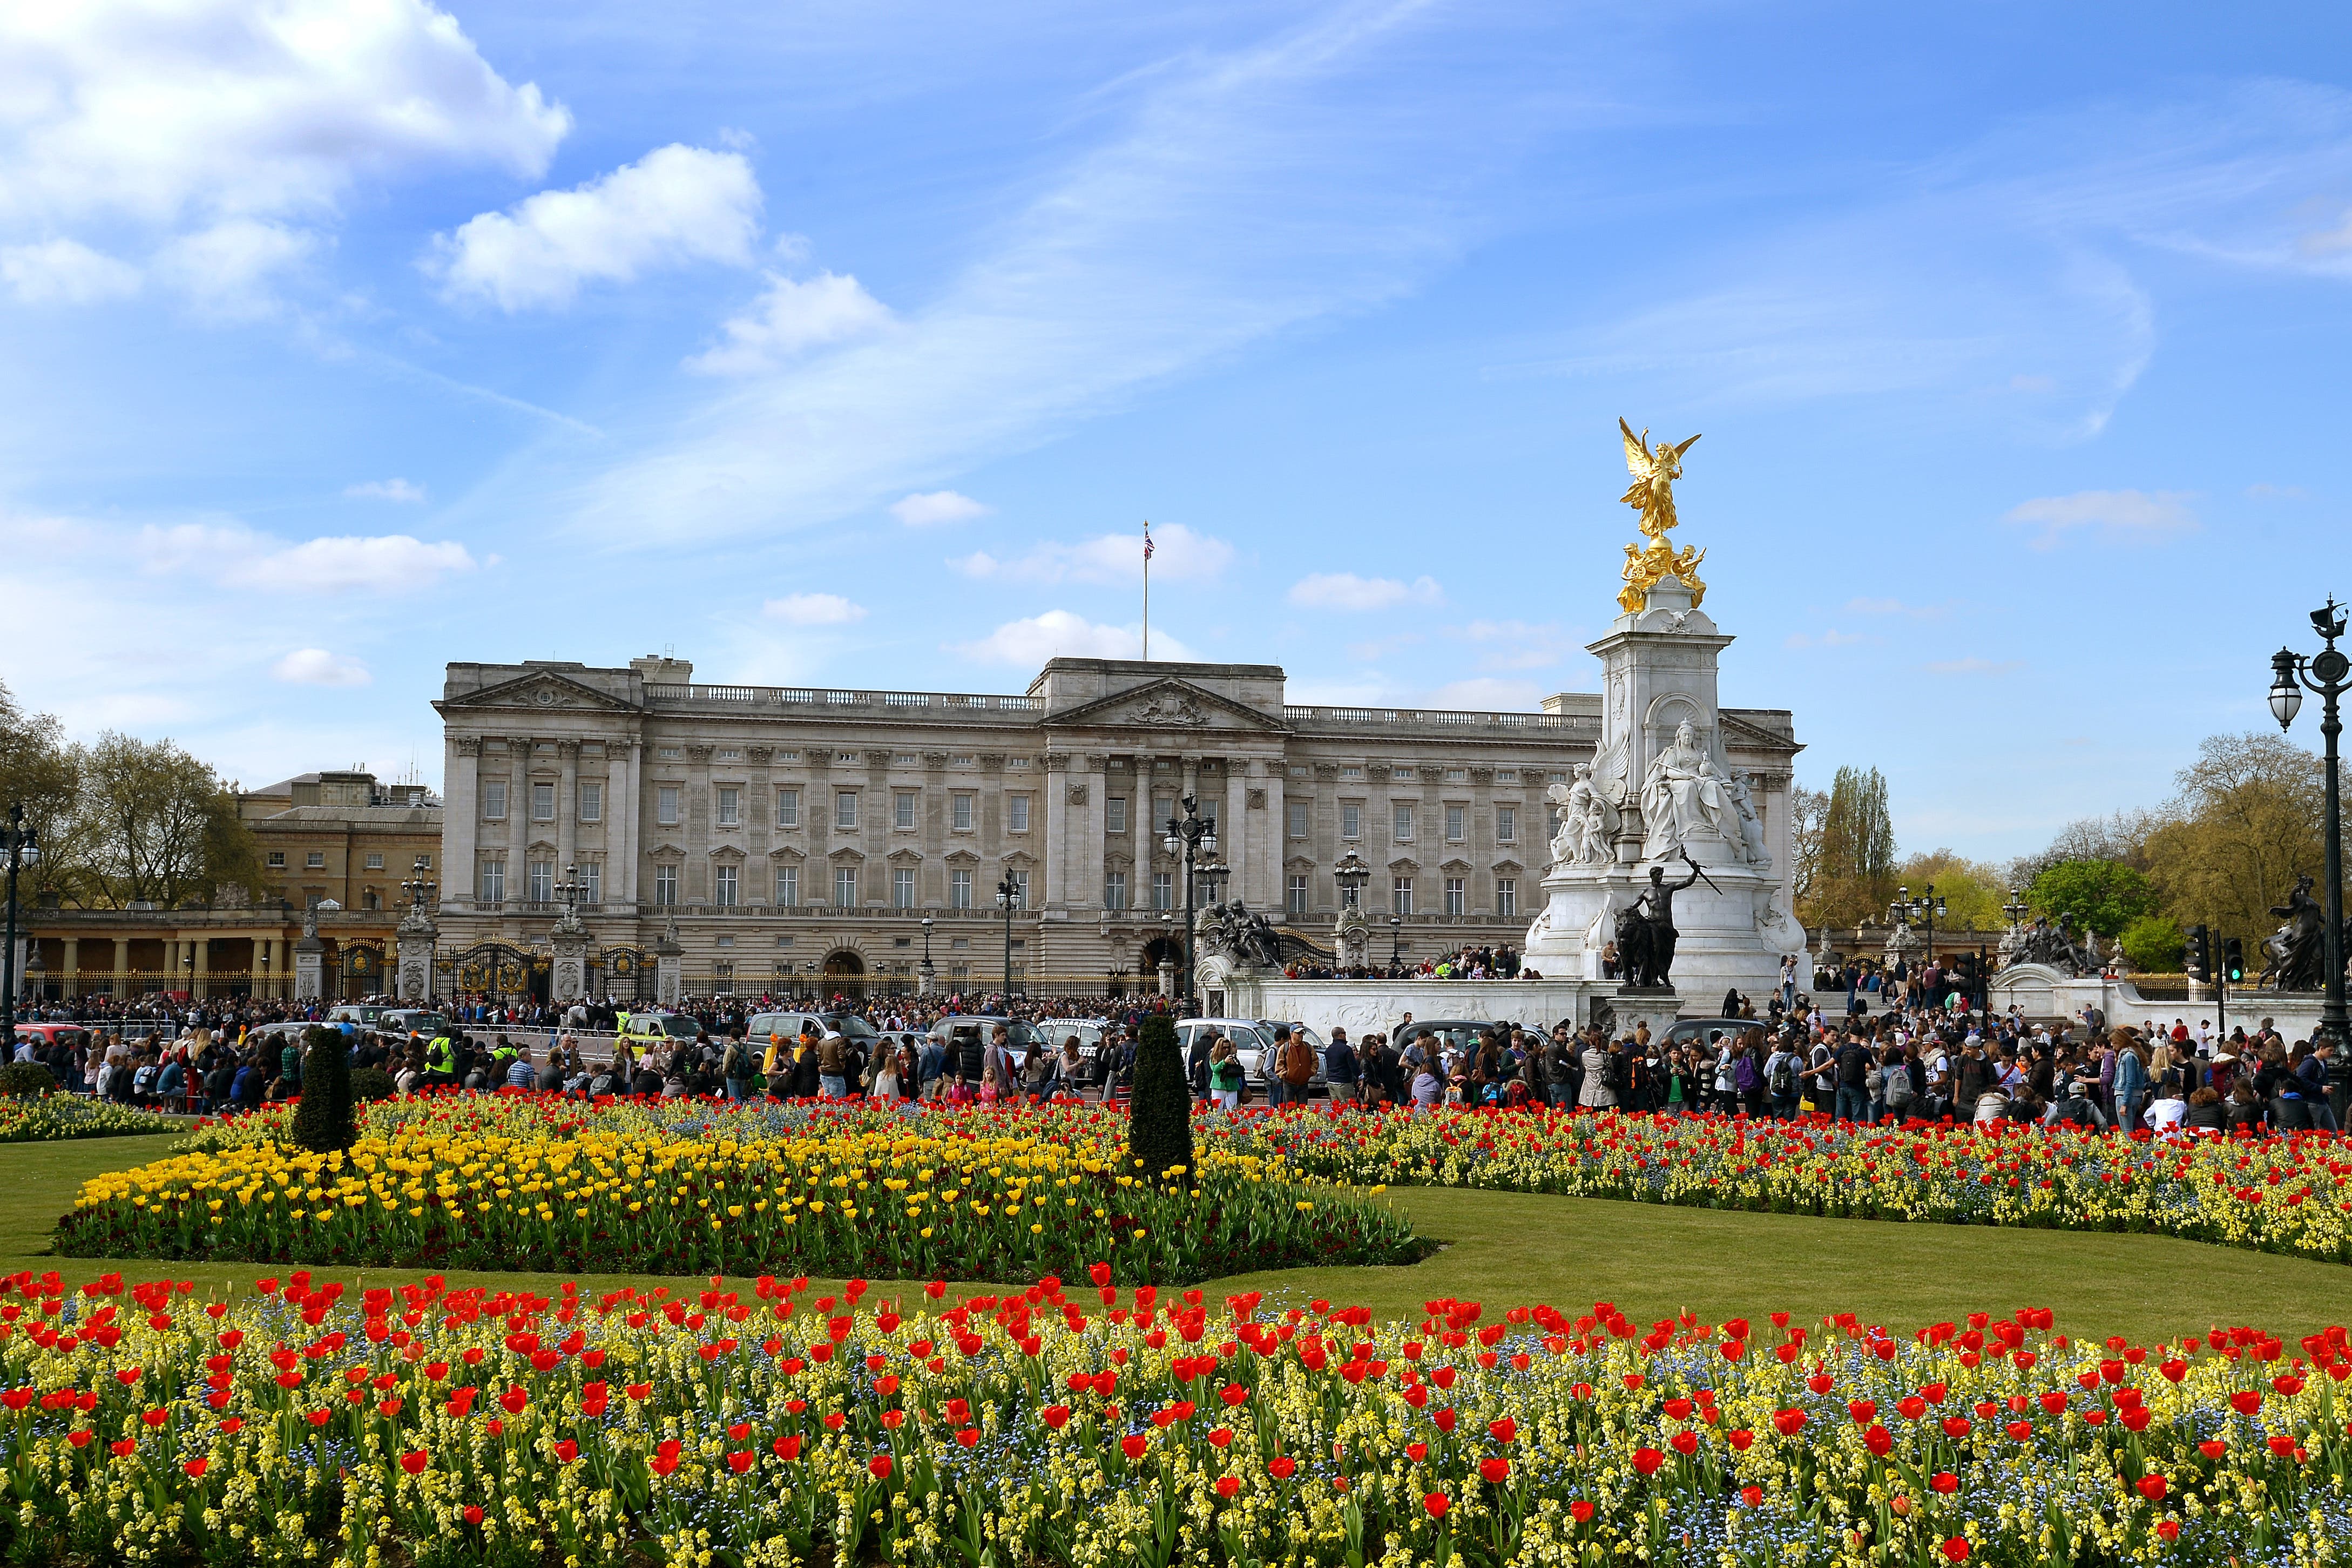 Emails between Buckingham Palace staff and NGN executives discuss ‘finding a resolution without lawyers’